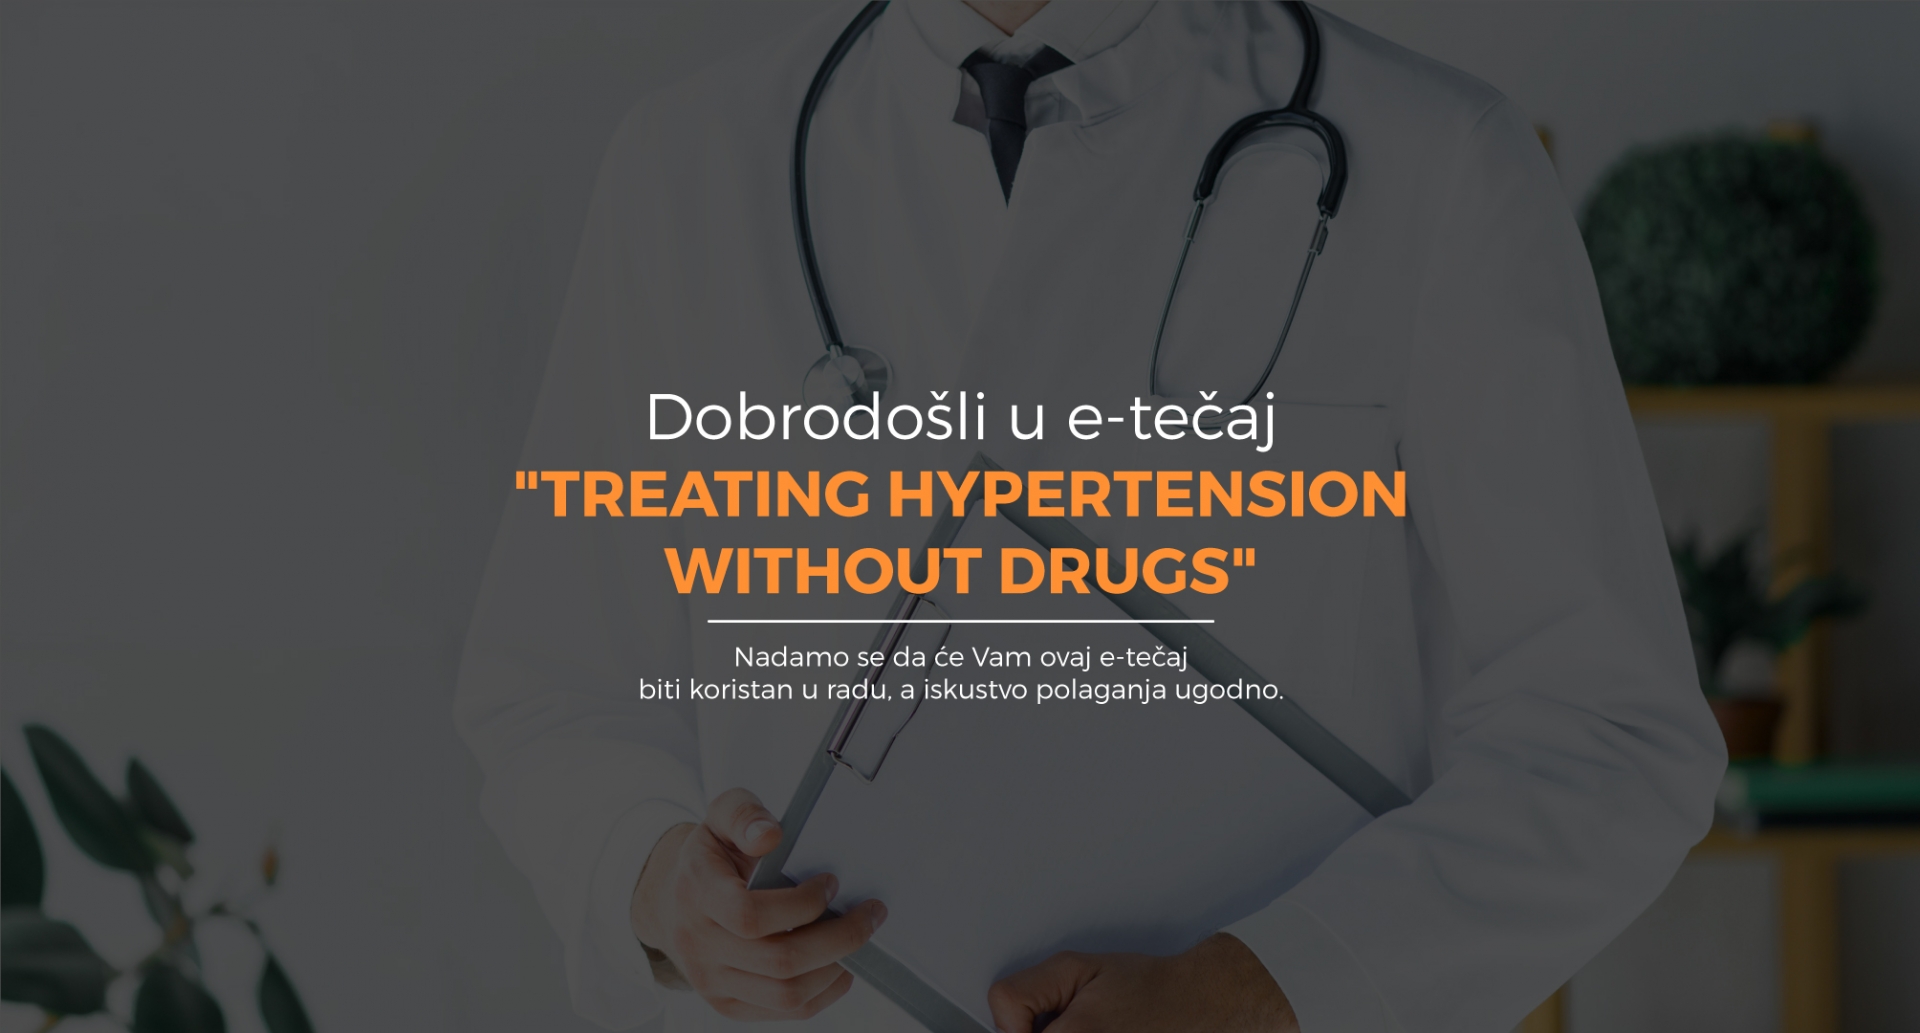 Treating Hypertension without Drugs